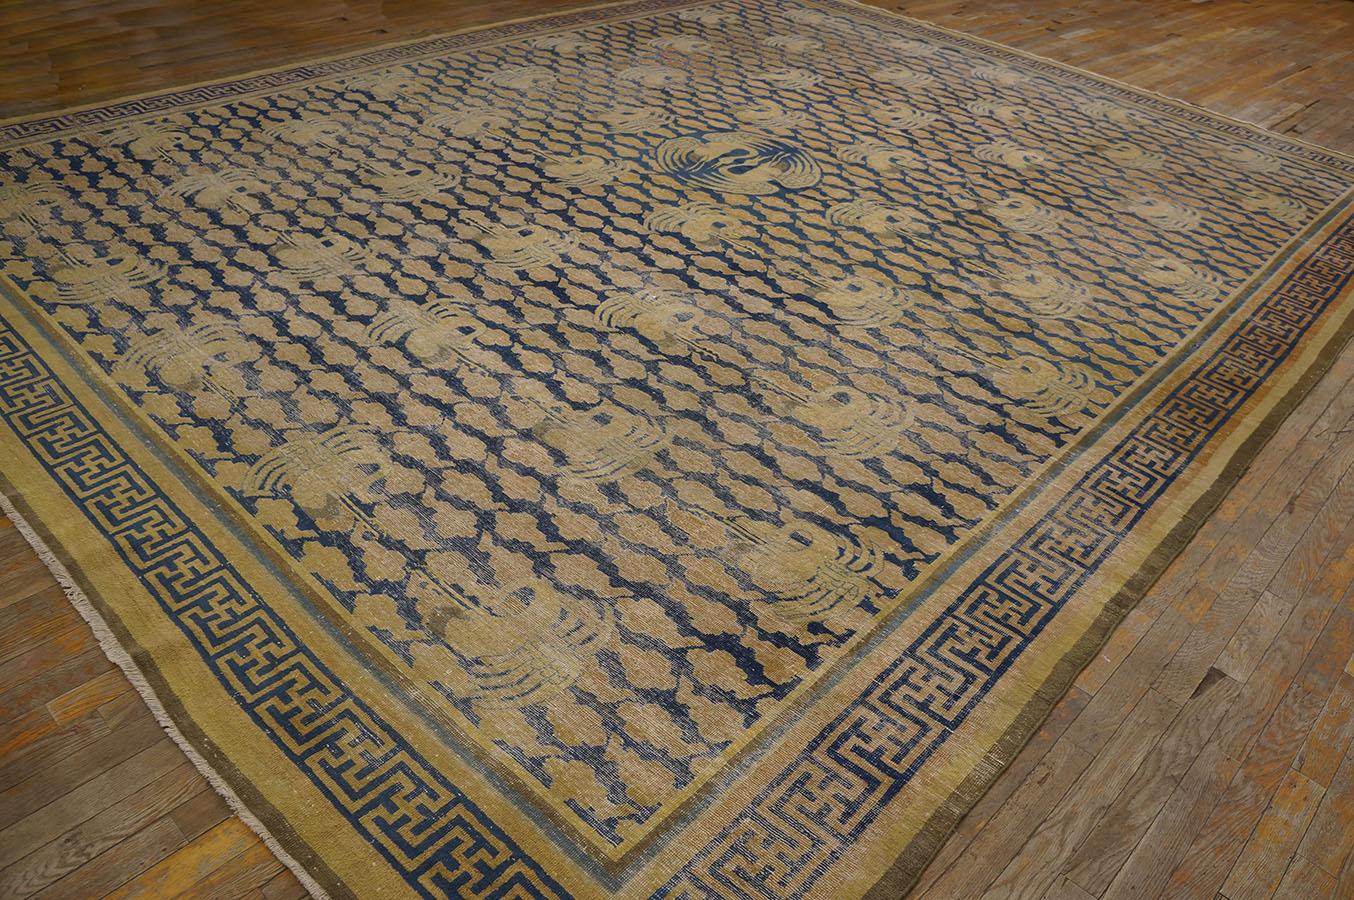 Late 19th Century Chinese Carpet ( 11'6'' x 14'6'' - 350 x 442 )
With design inspiration from 17th & 18th Century Ningxia Carpets